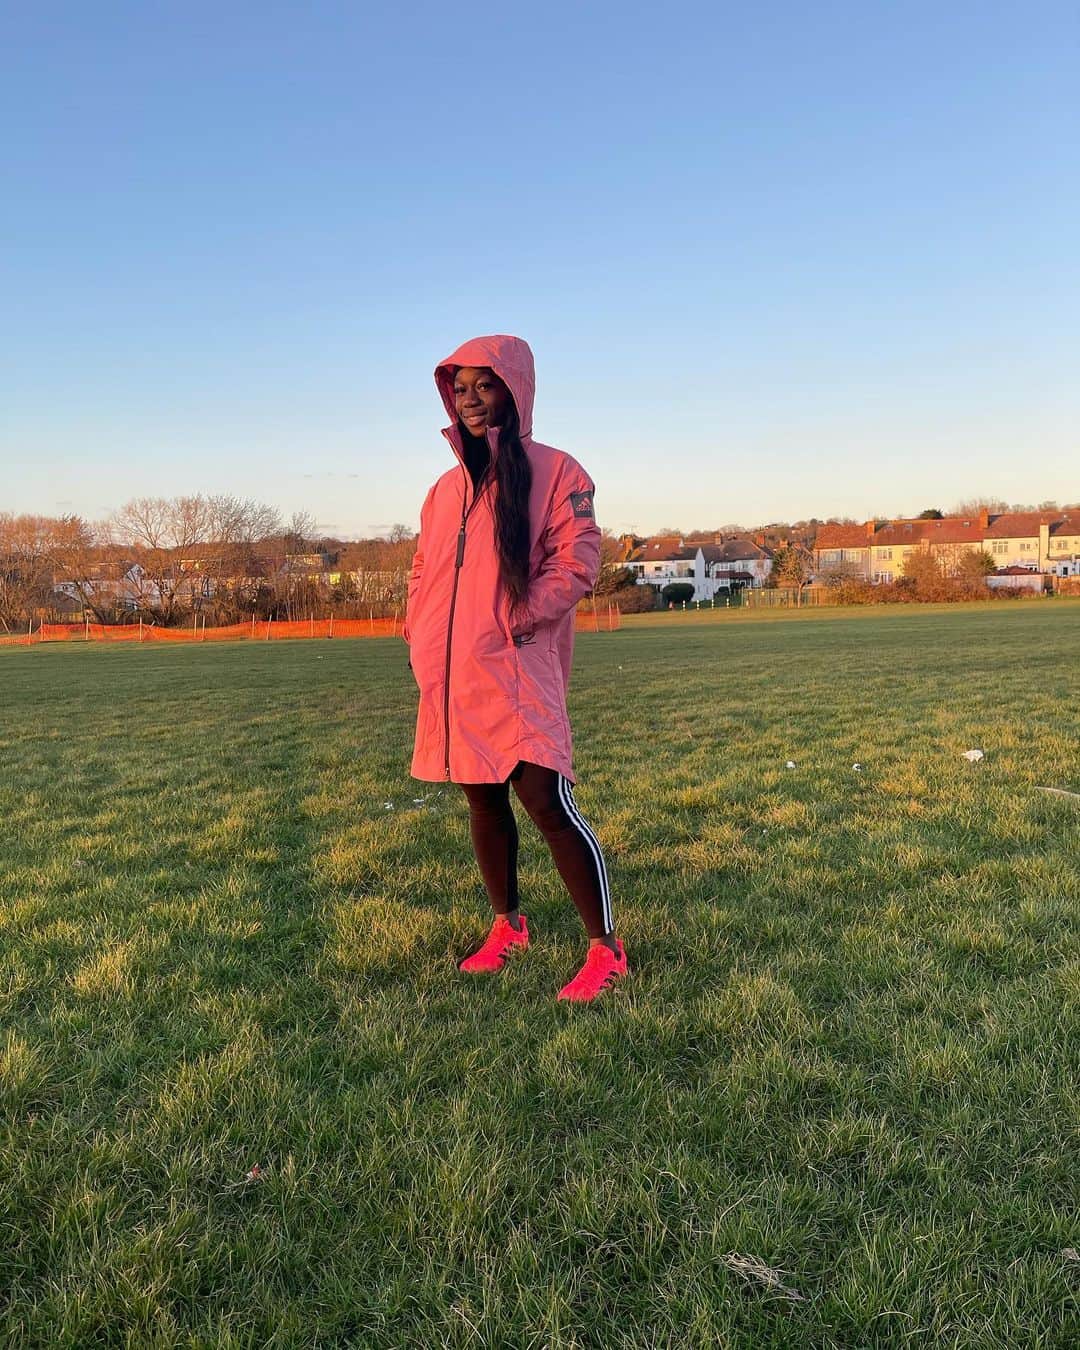 Kristal AWUAHのインスタグラム：「Beautiful day today for a nice stroll in the park on my rest day, wearing my @adidasterrex jacket,and we all know pink is a bit of me ☺️  #4in1 functionality✅🤩  #adidasmyshelter  #createdwithadidas  #windrdy」